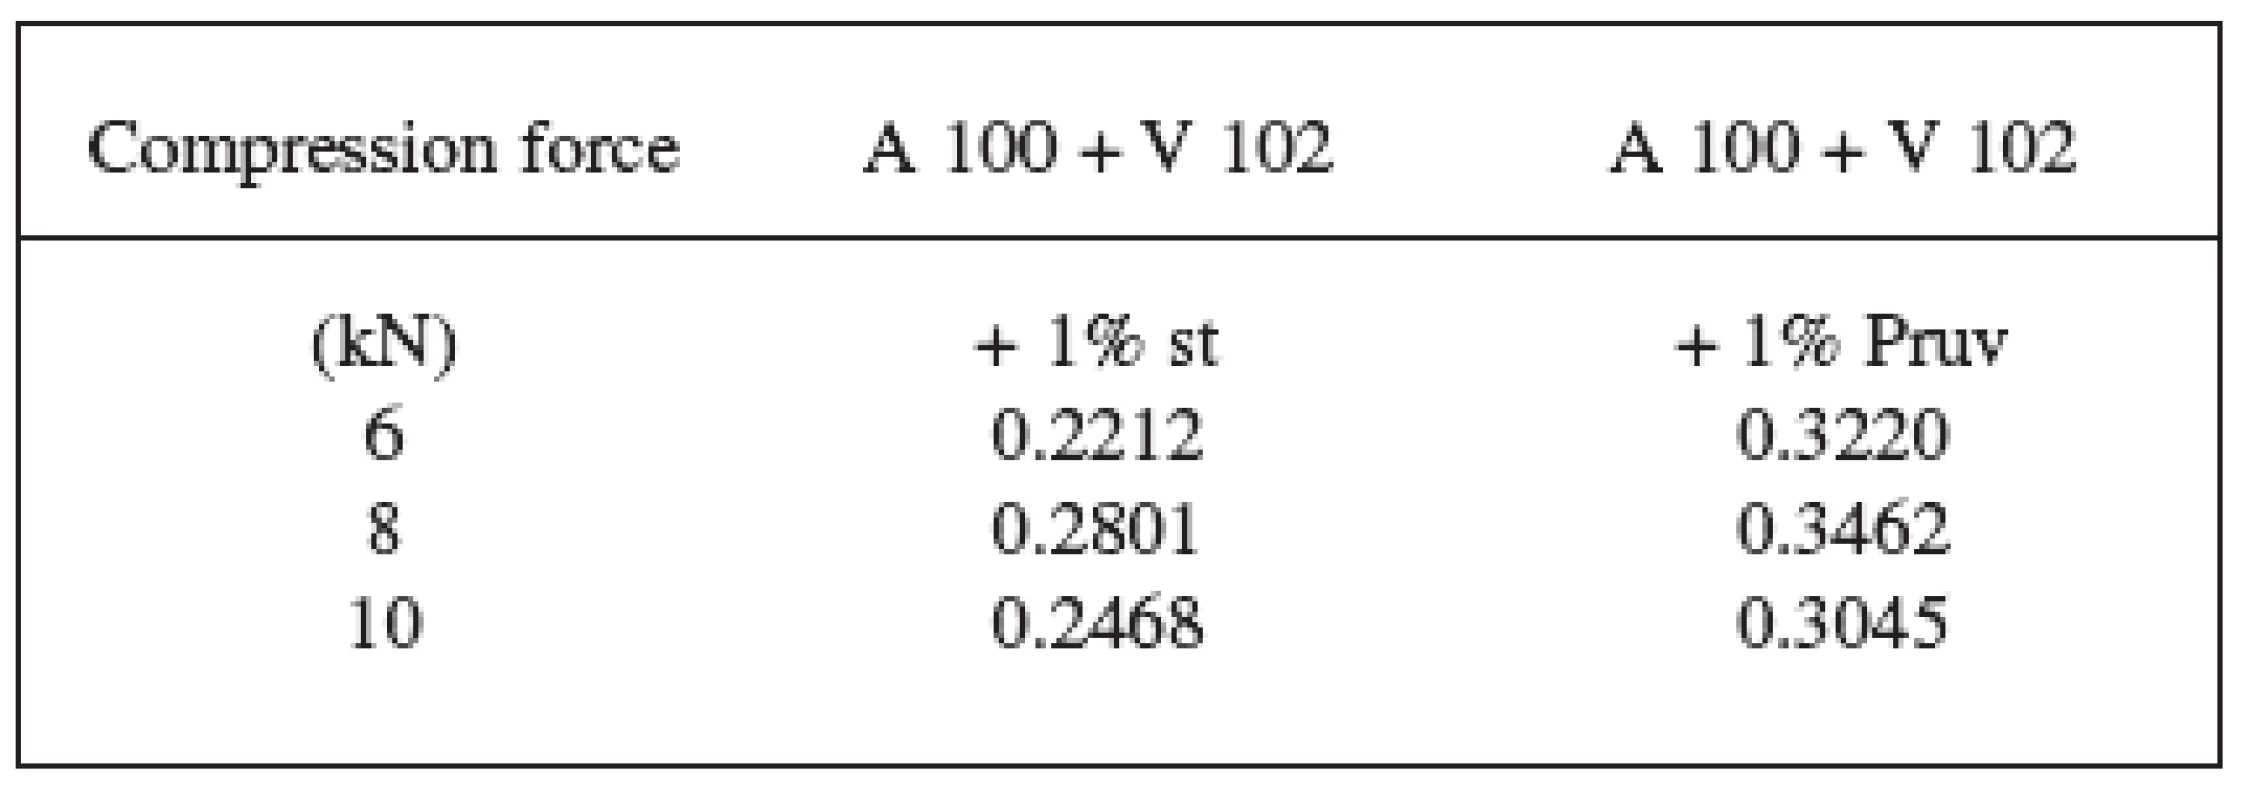 Values of LSR for the mixture Advantose 100 and Vivapur 102 in a ratio of 1:1